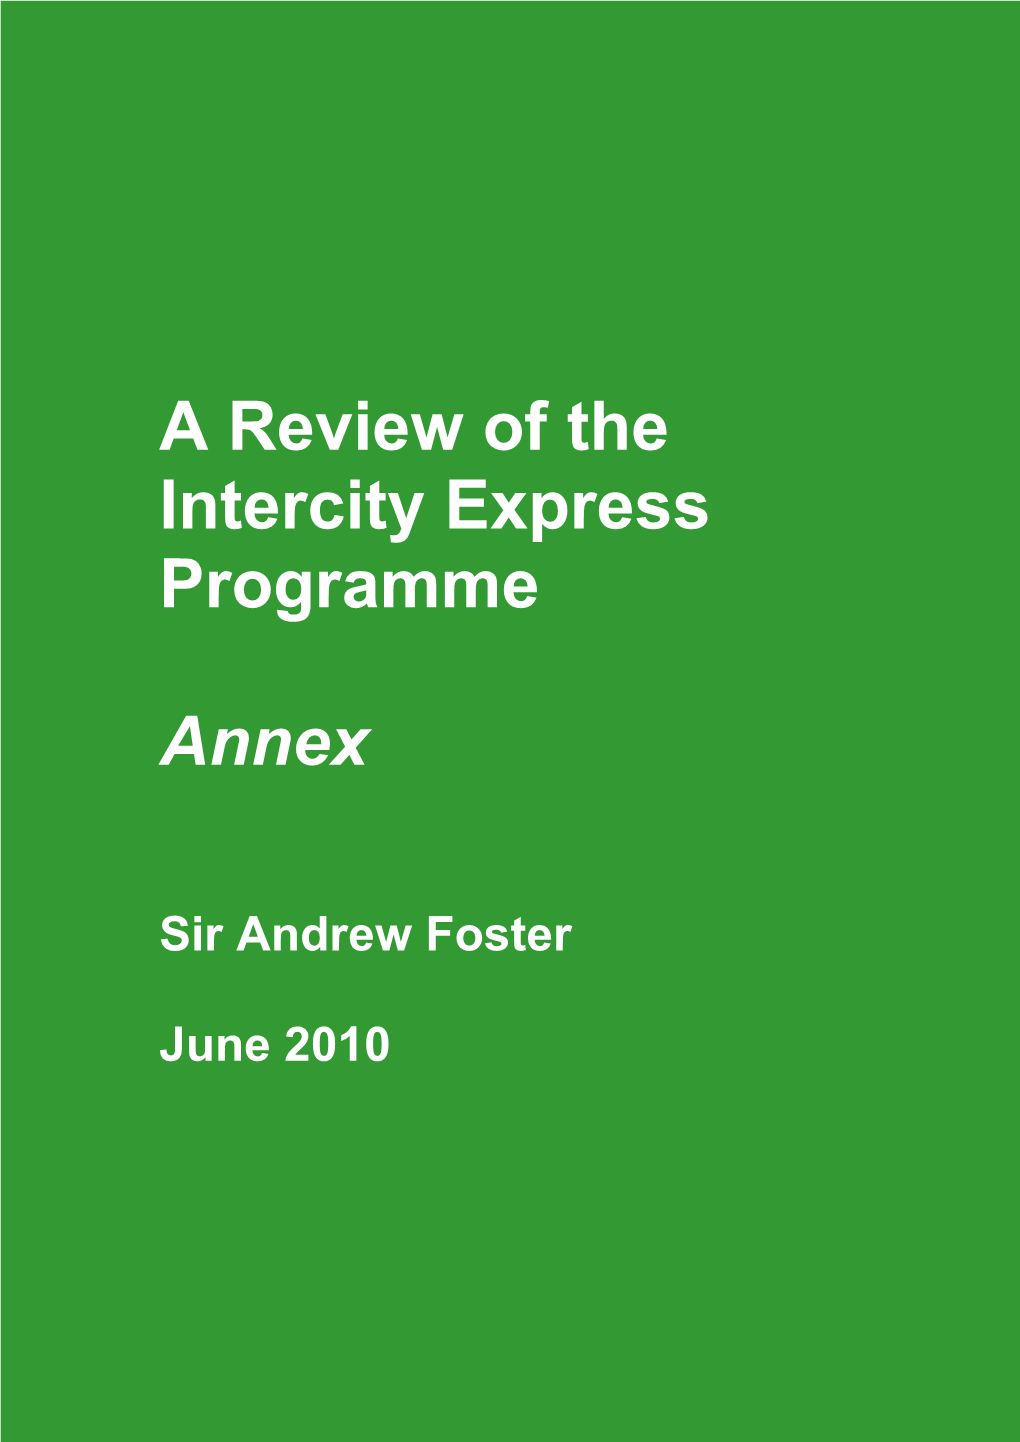 A Review of the Intercity Express Programme